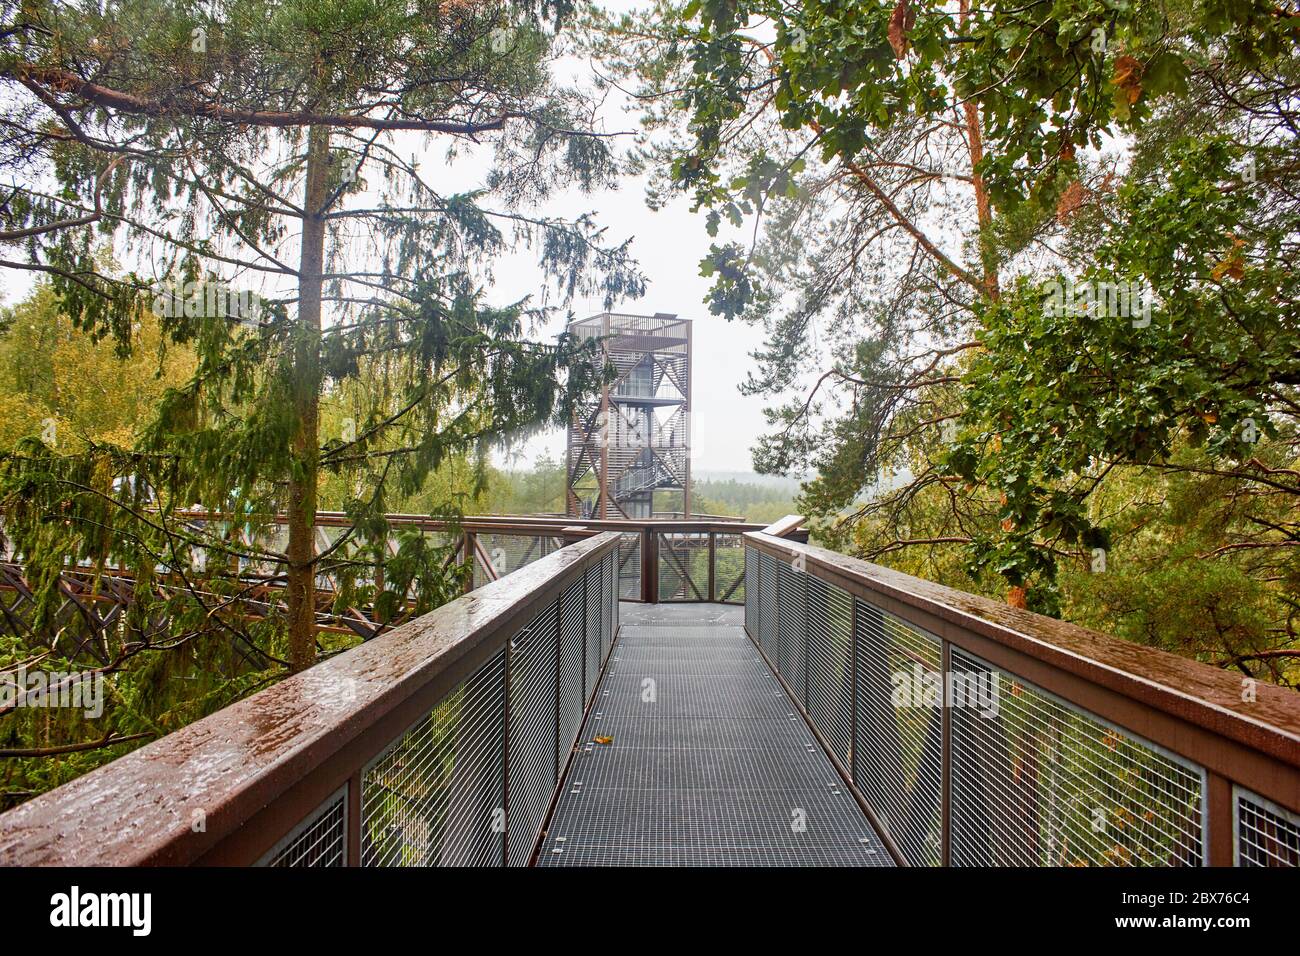 Footbridge in the forest with tower at the end. Stock Photo